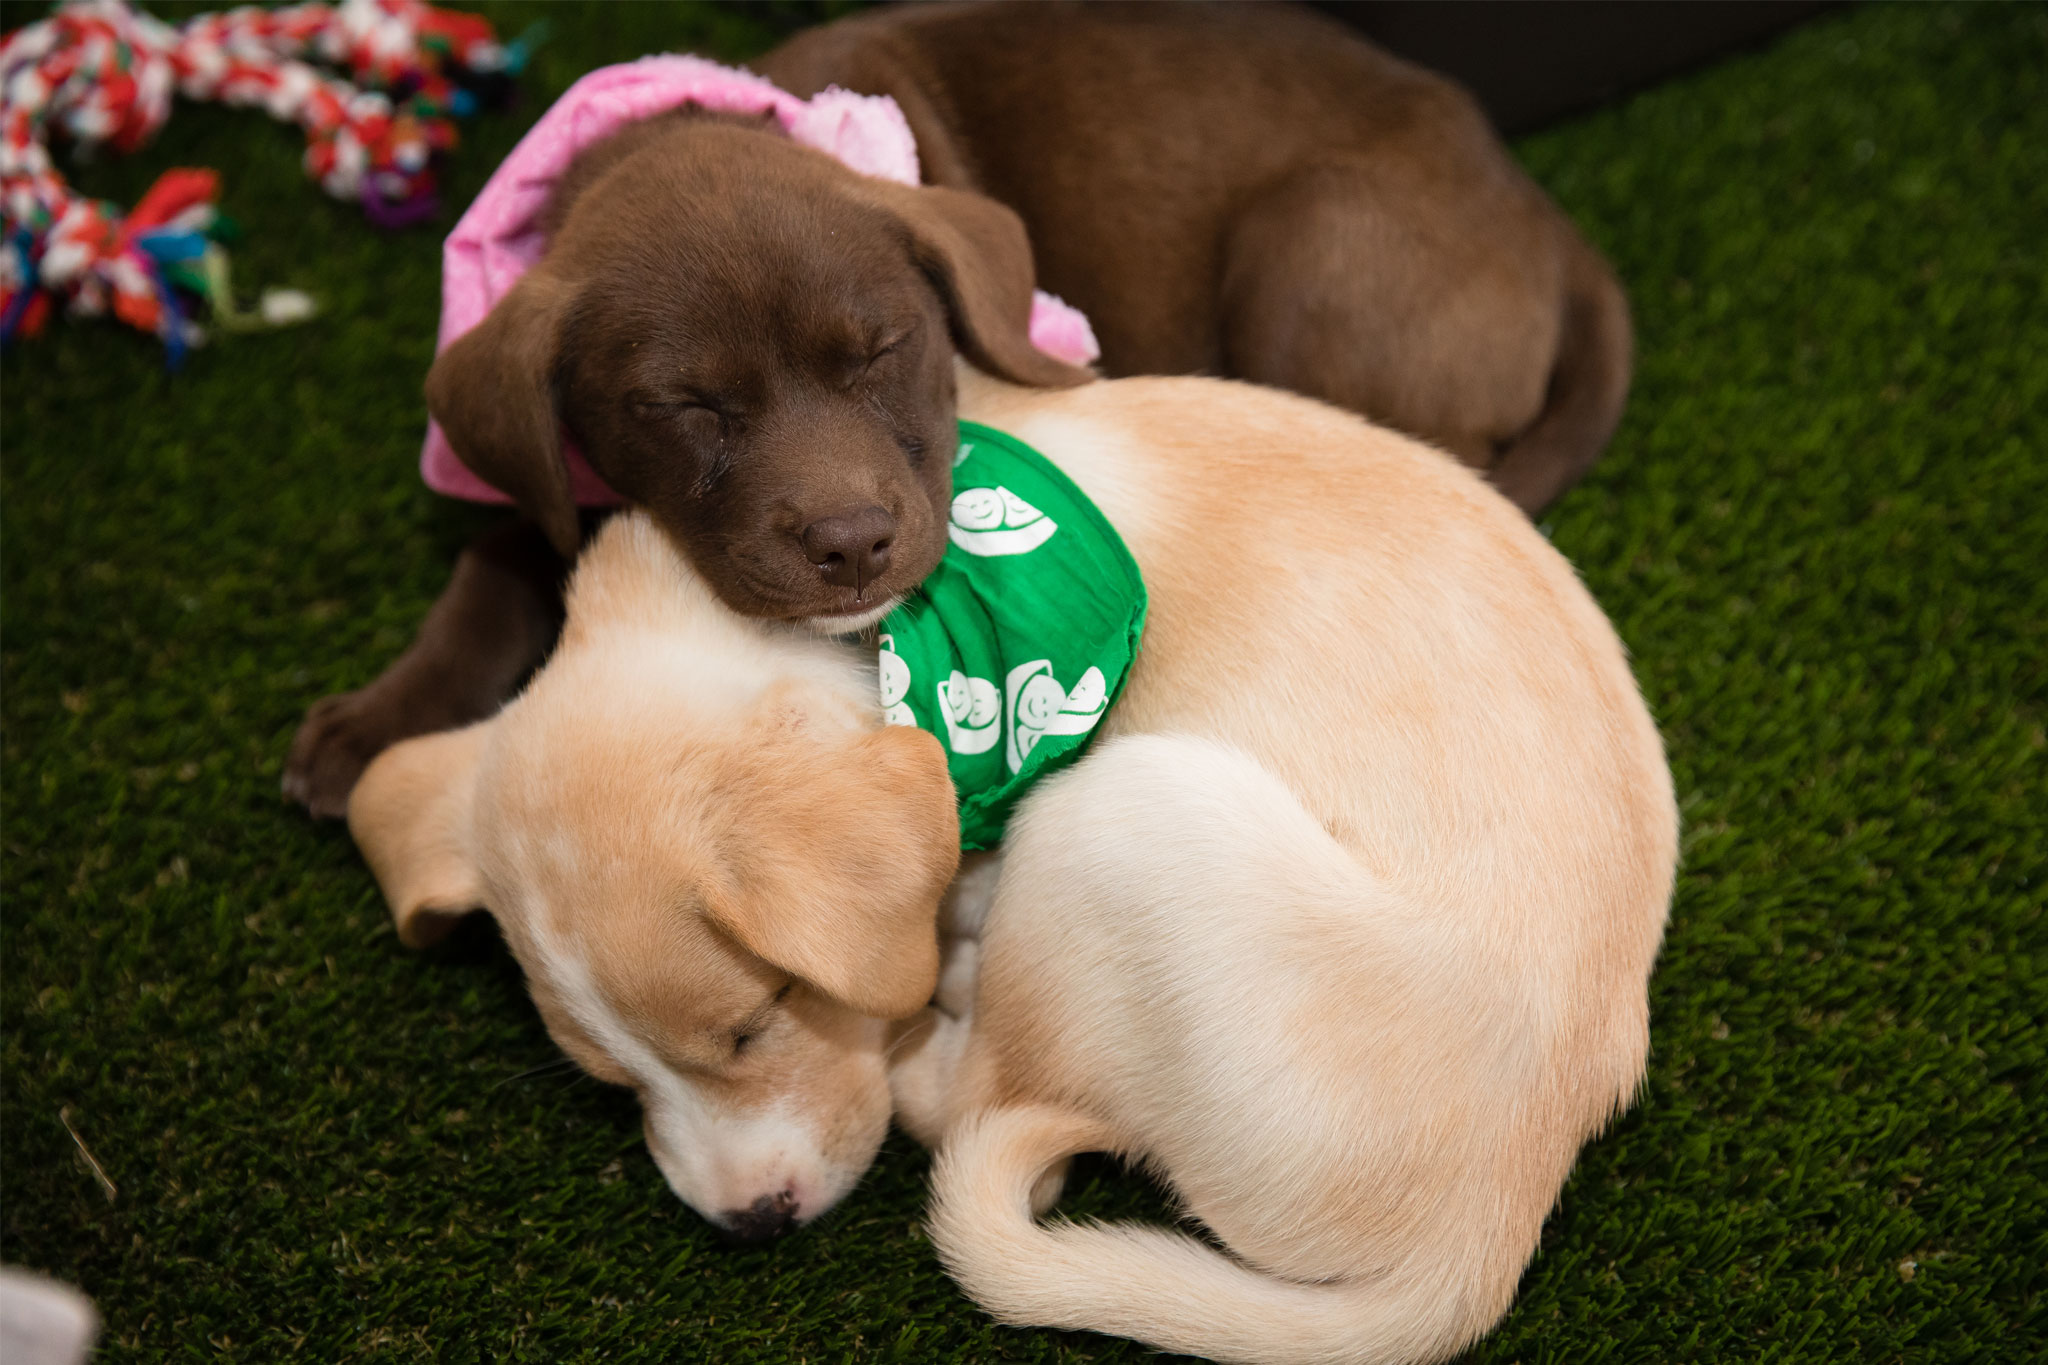 Picture of puppies at SXSW.